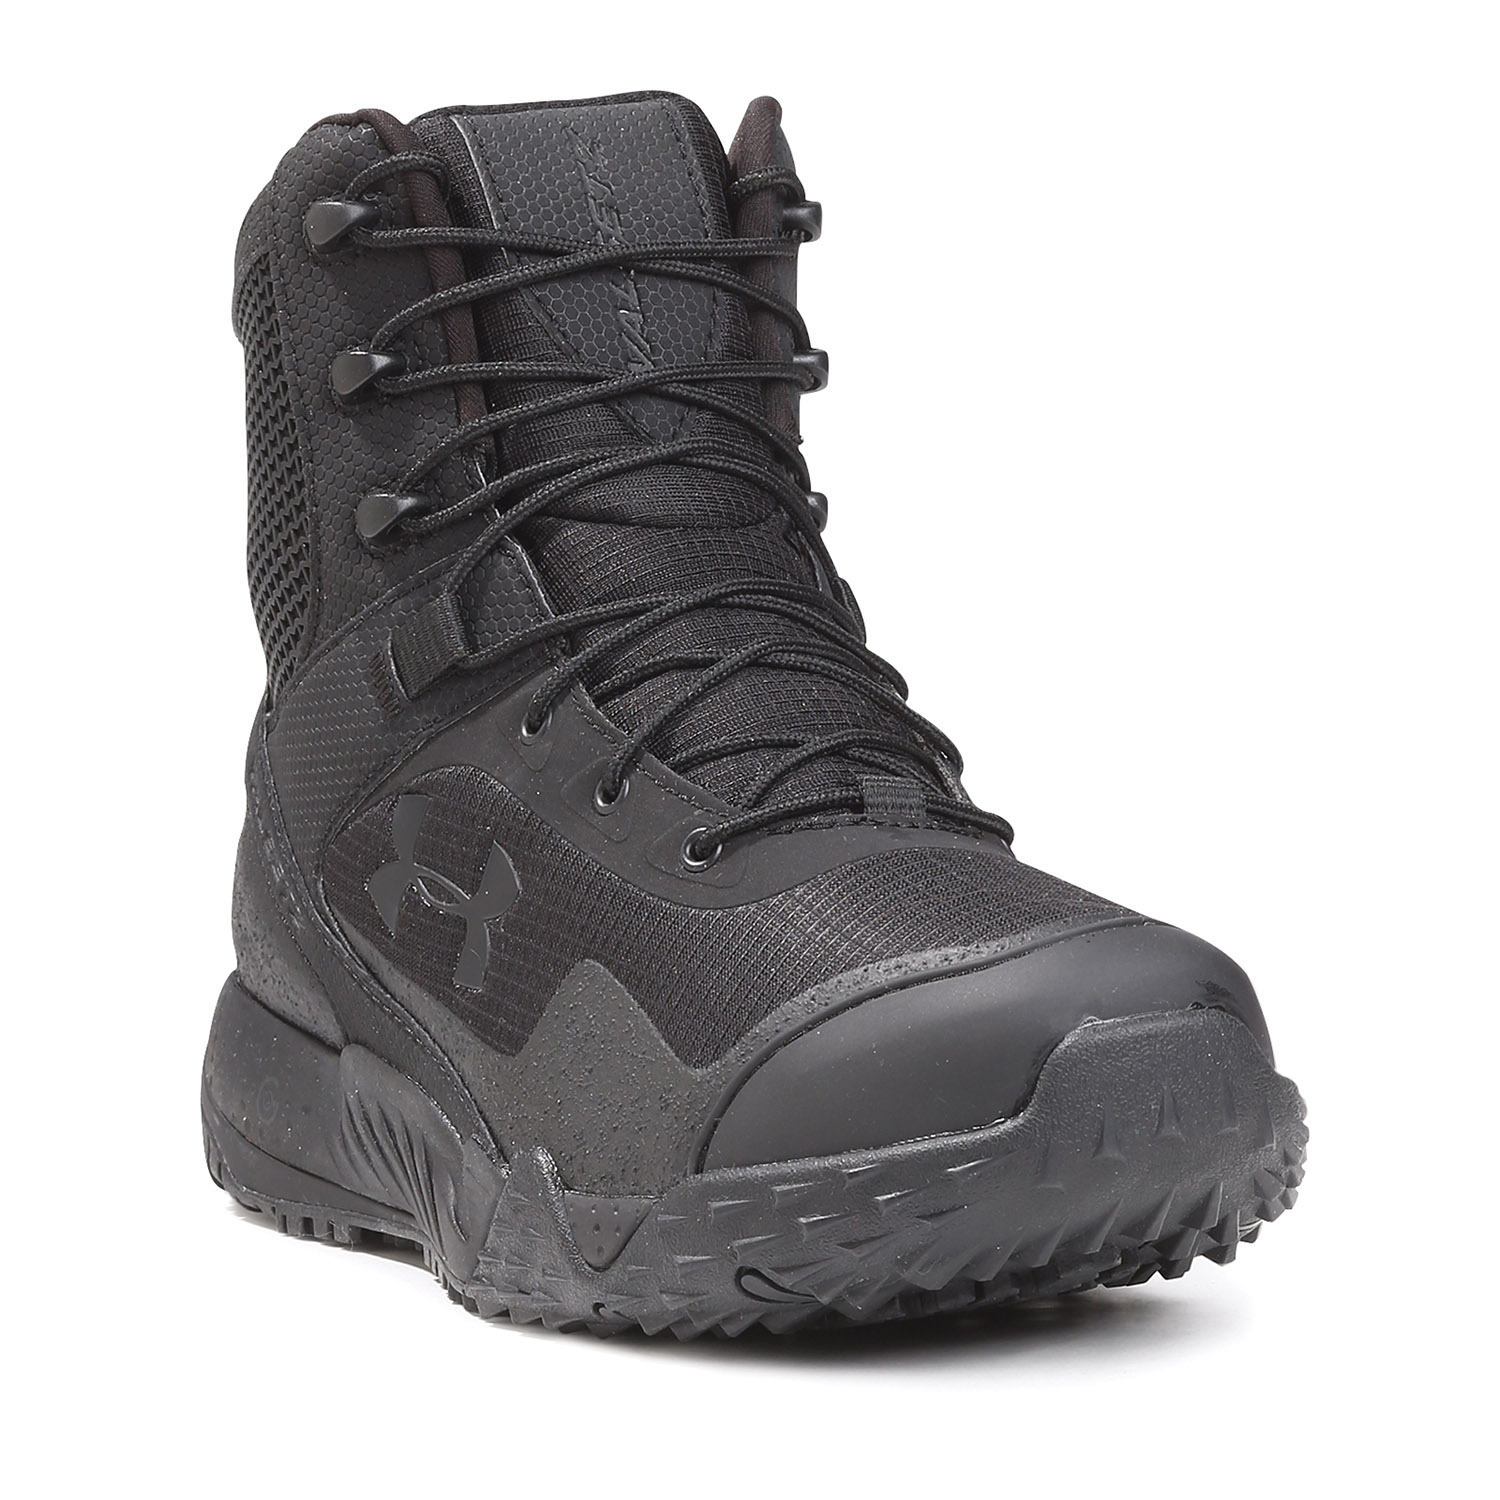 under armor boots sale